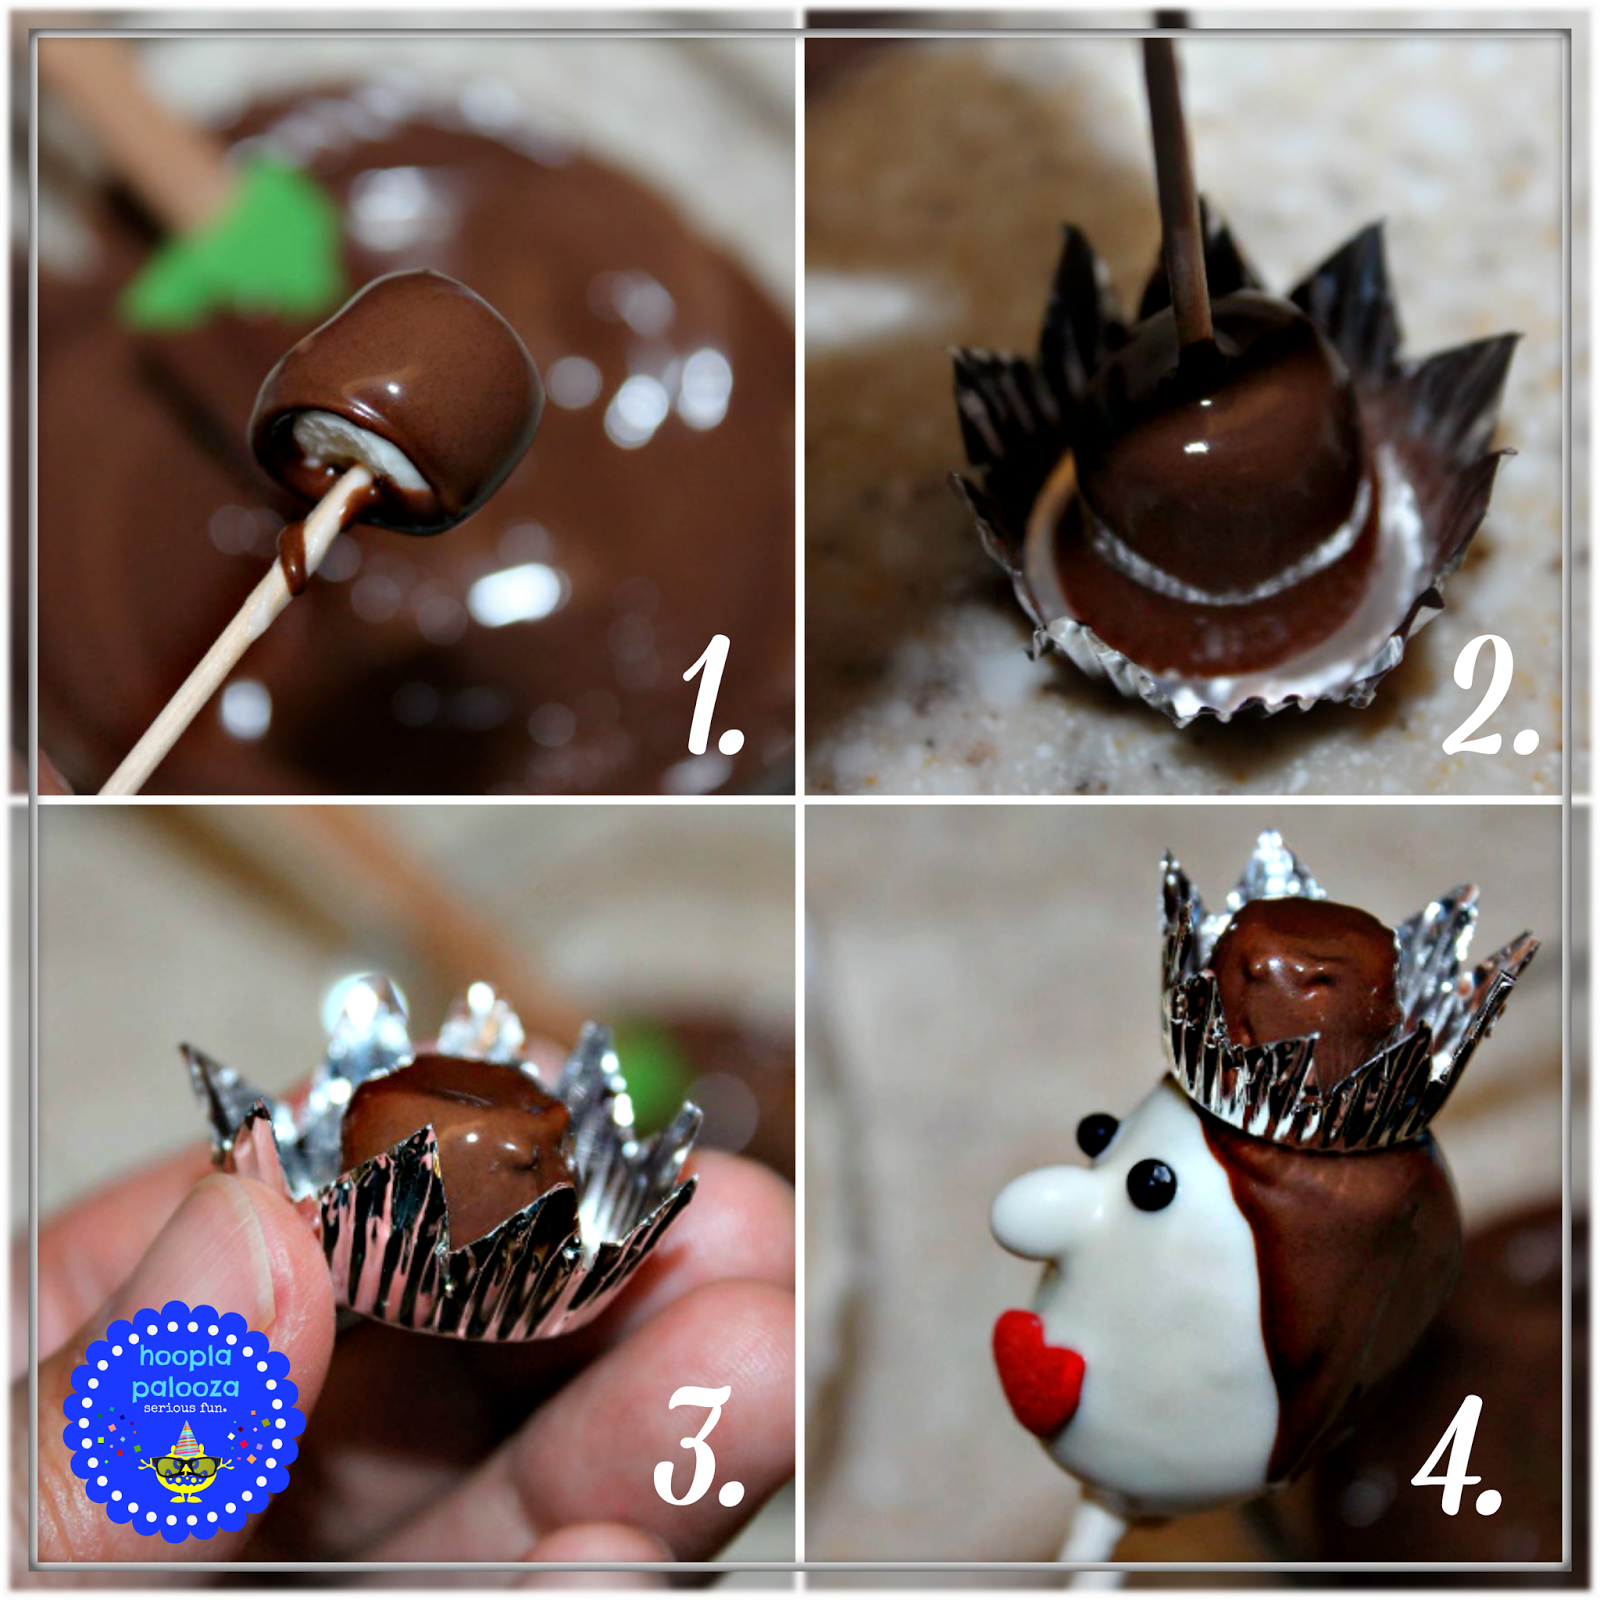 hoopla palooza: queen and princess cake pops (for mother's day)